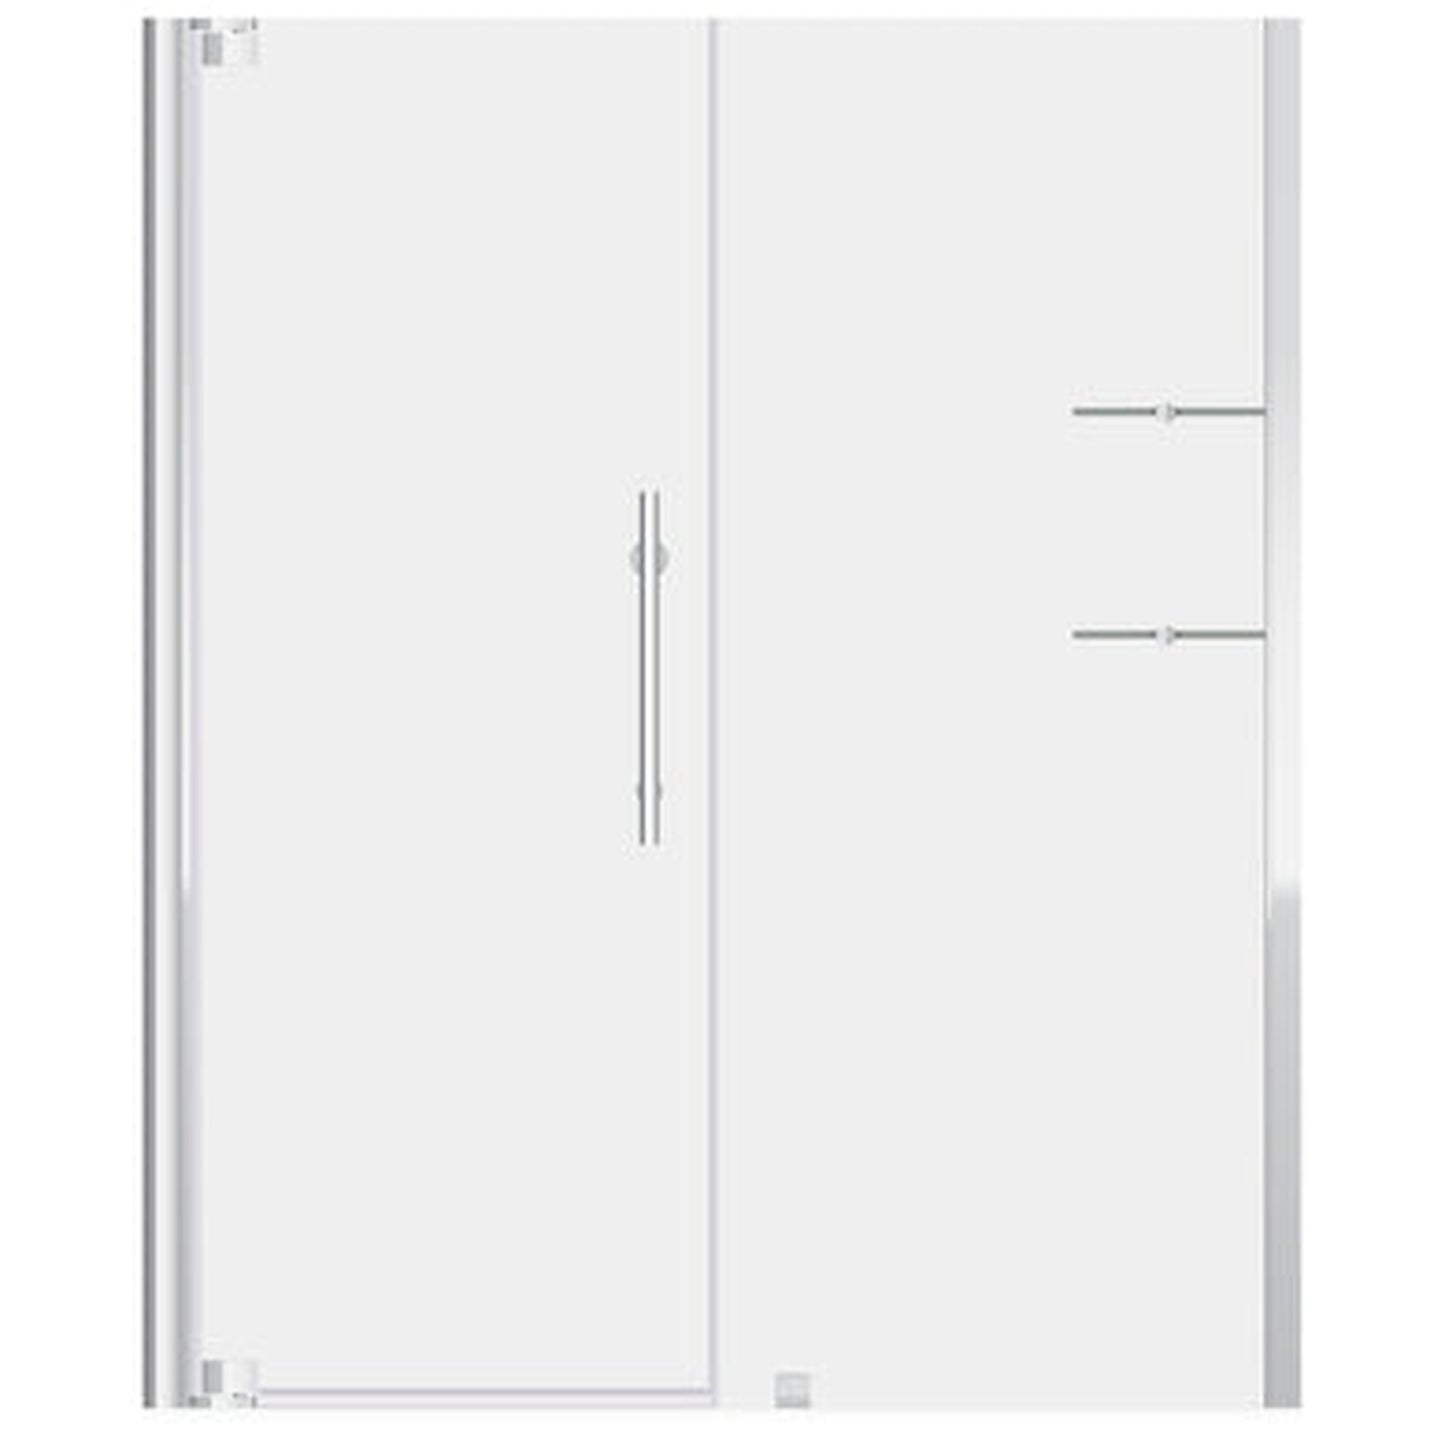 LessCare Ultra-G 63-65" x 72" Chrome Swing-Out Shower Door with 30" Side Panel